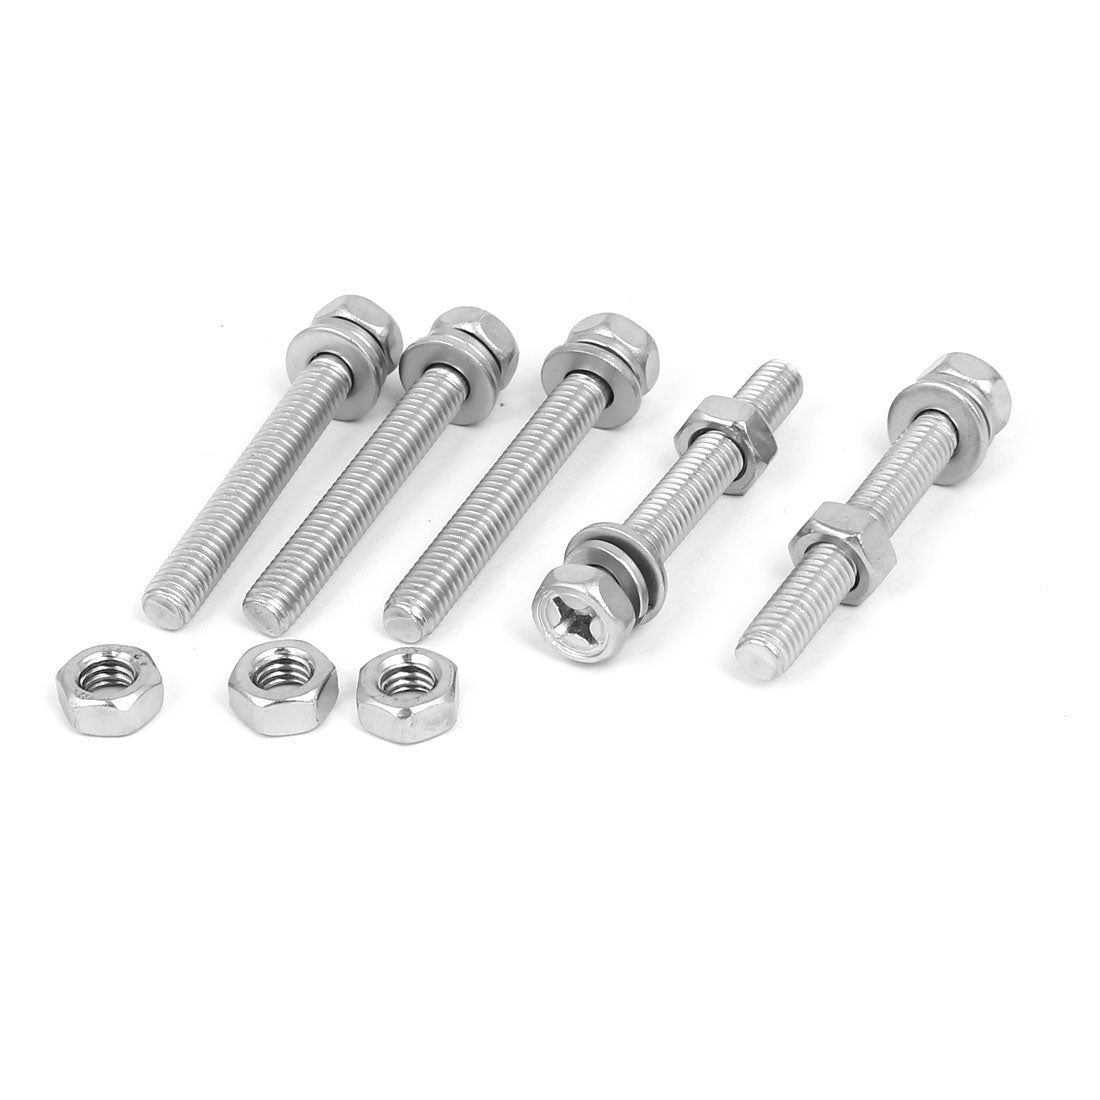 uxcell Uxcell M6 x 45mm 304 Stainless Steel Phillips Hex Head Bolts Nuts w Washers 5 Sets